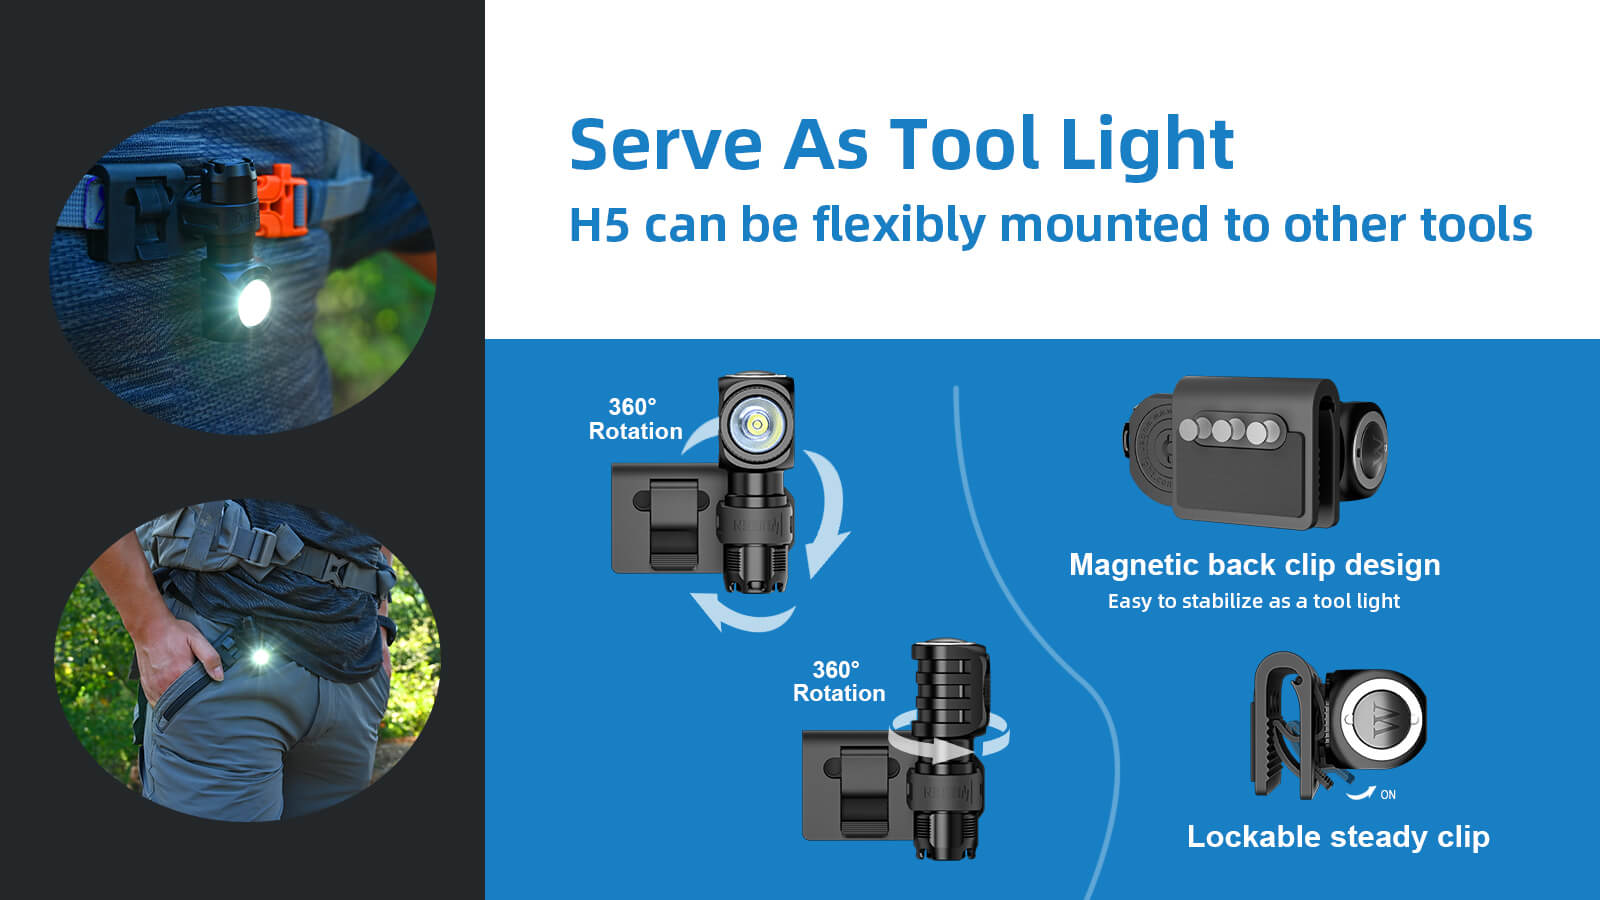 Serve As Tool Light H5 can be flexibly mounted to other tools